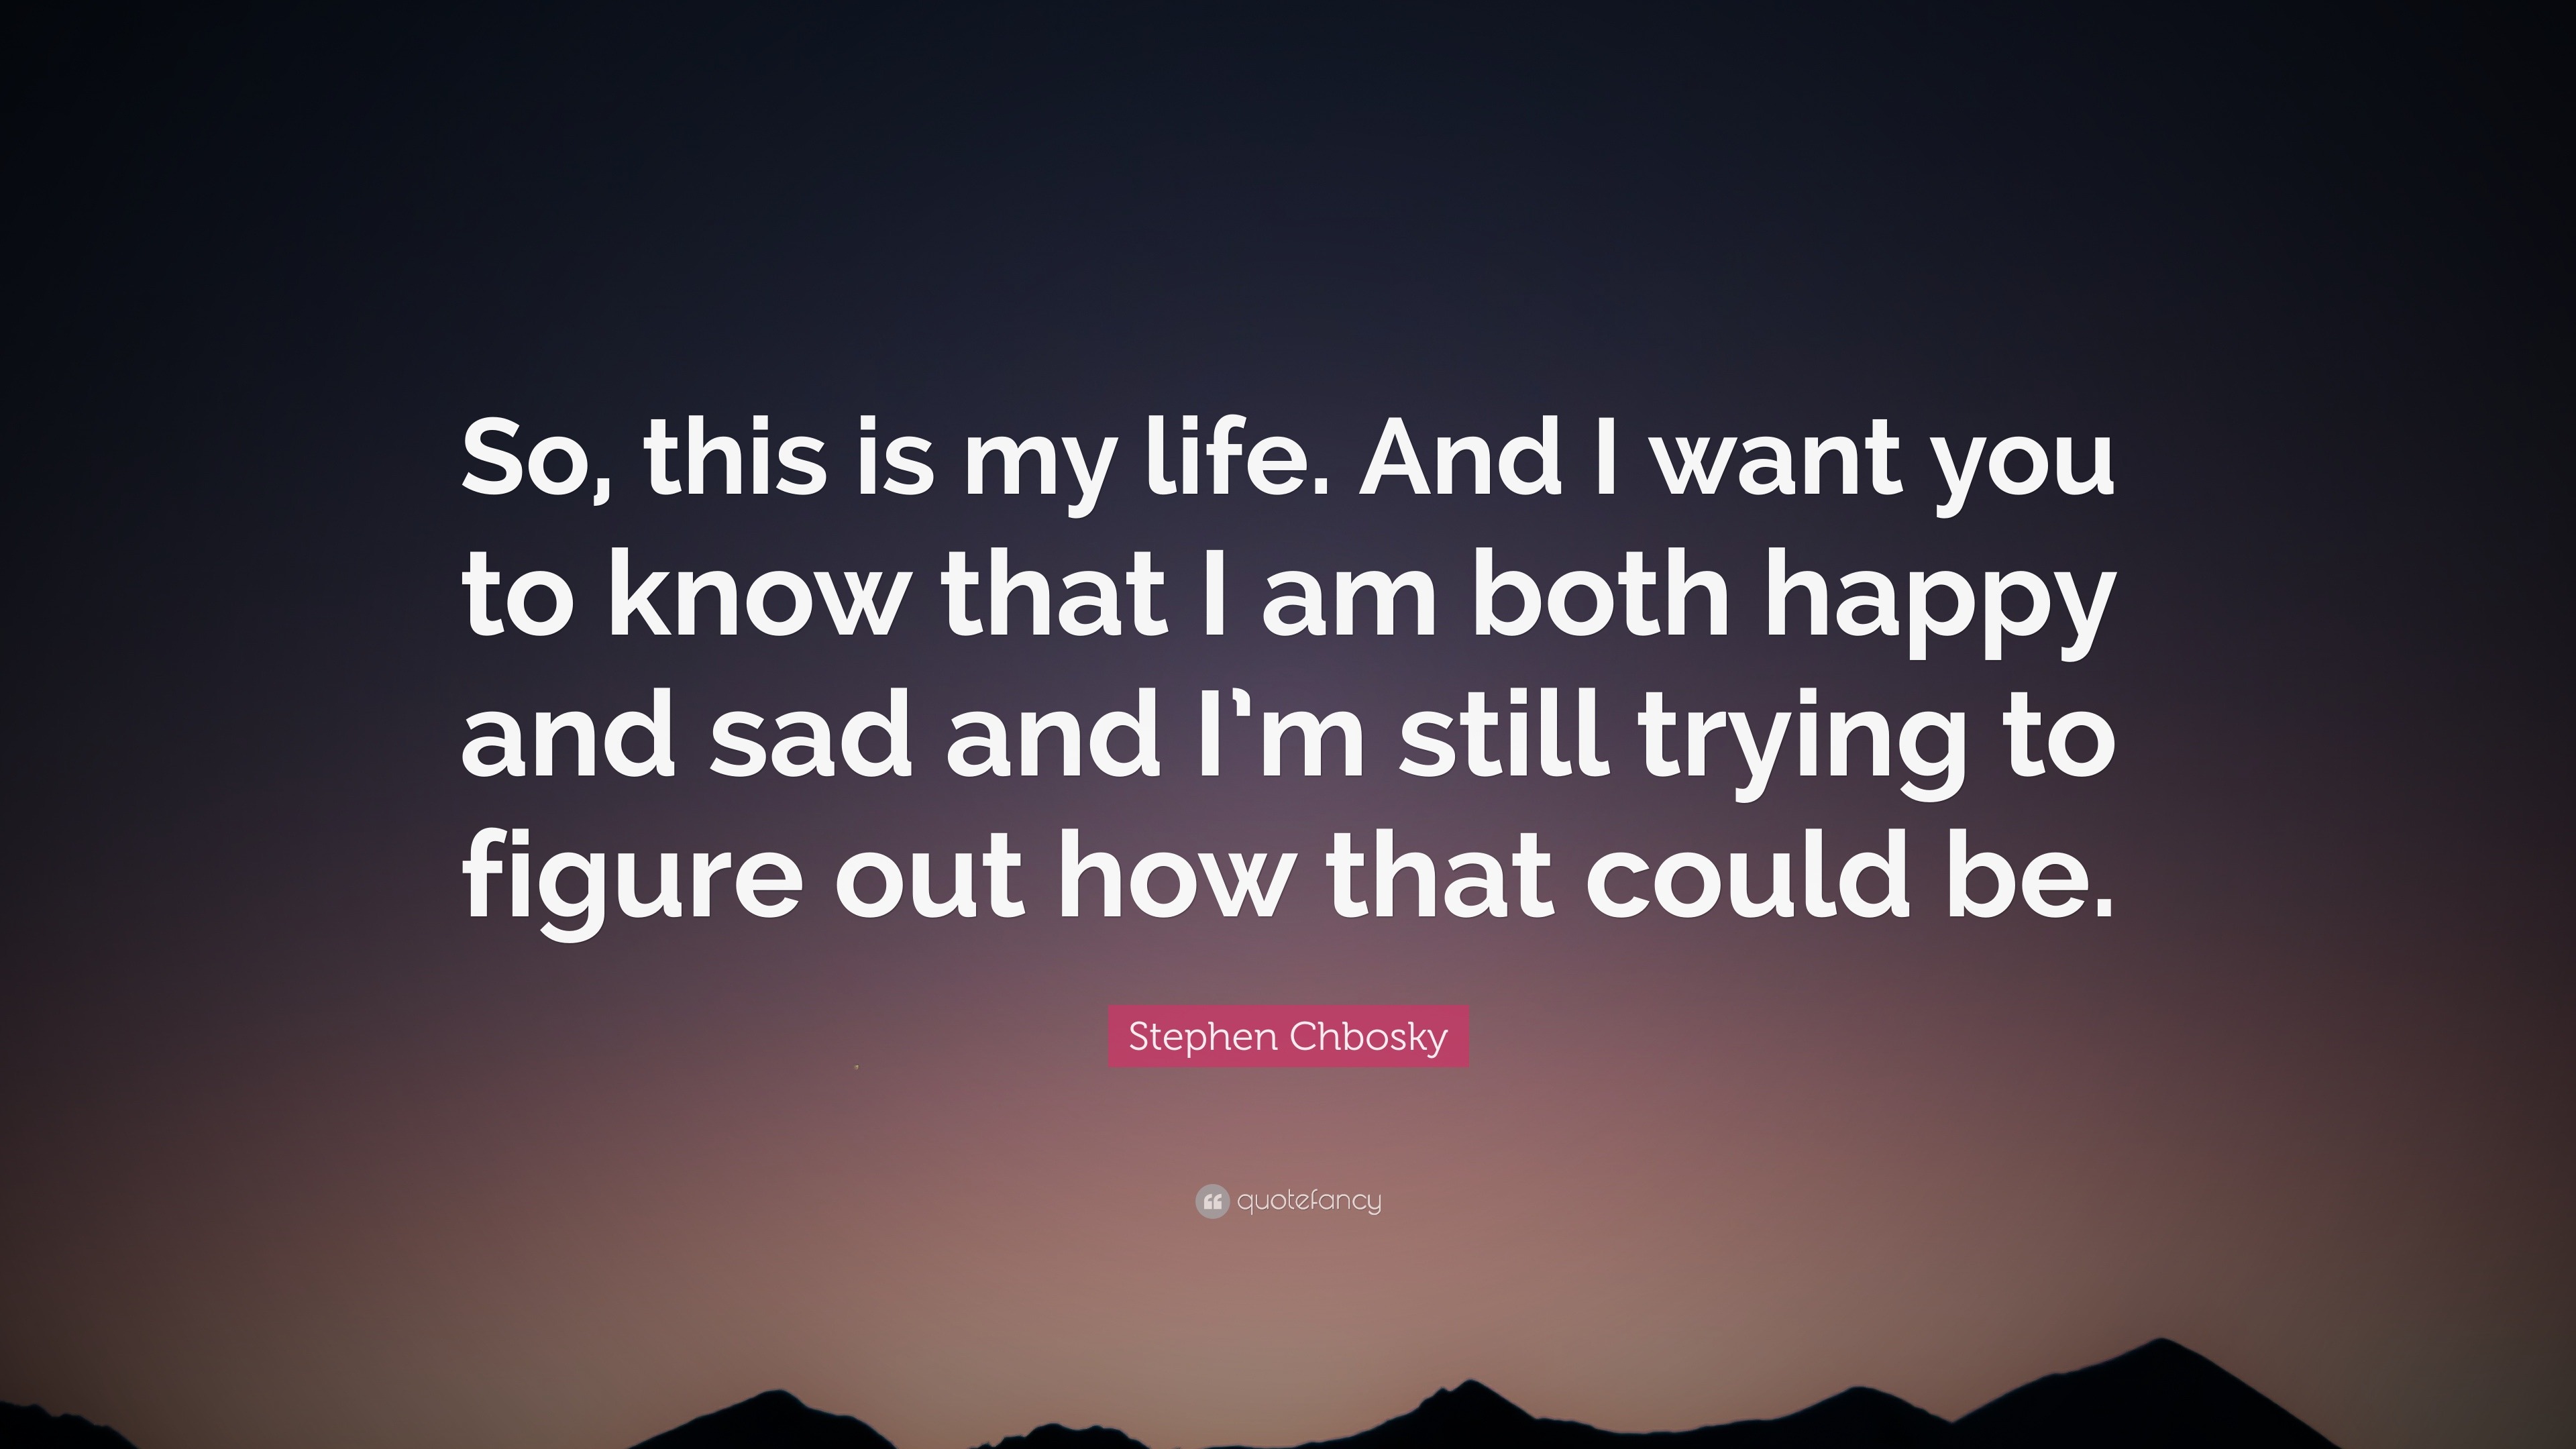 Stephen Chbosky Quote So This Is My Life And I Want You To Know That I Am Both Happy And Sad And I M Still Trying To Figure Out How That Cou